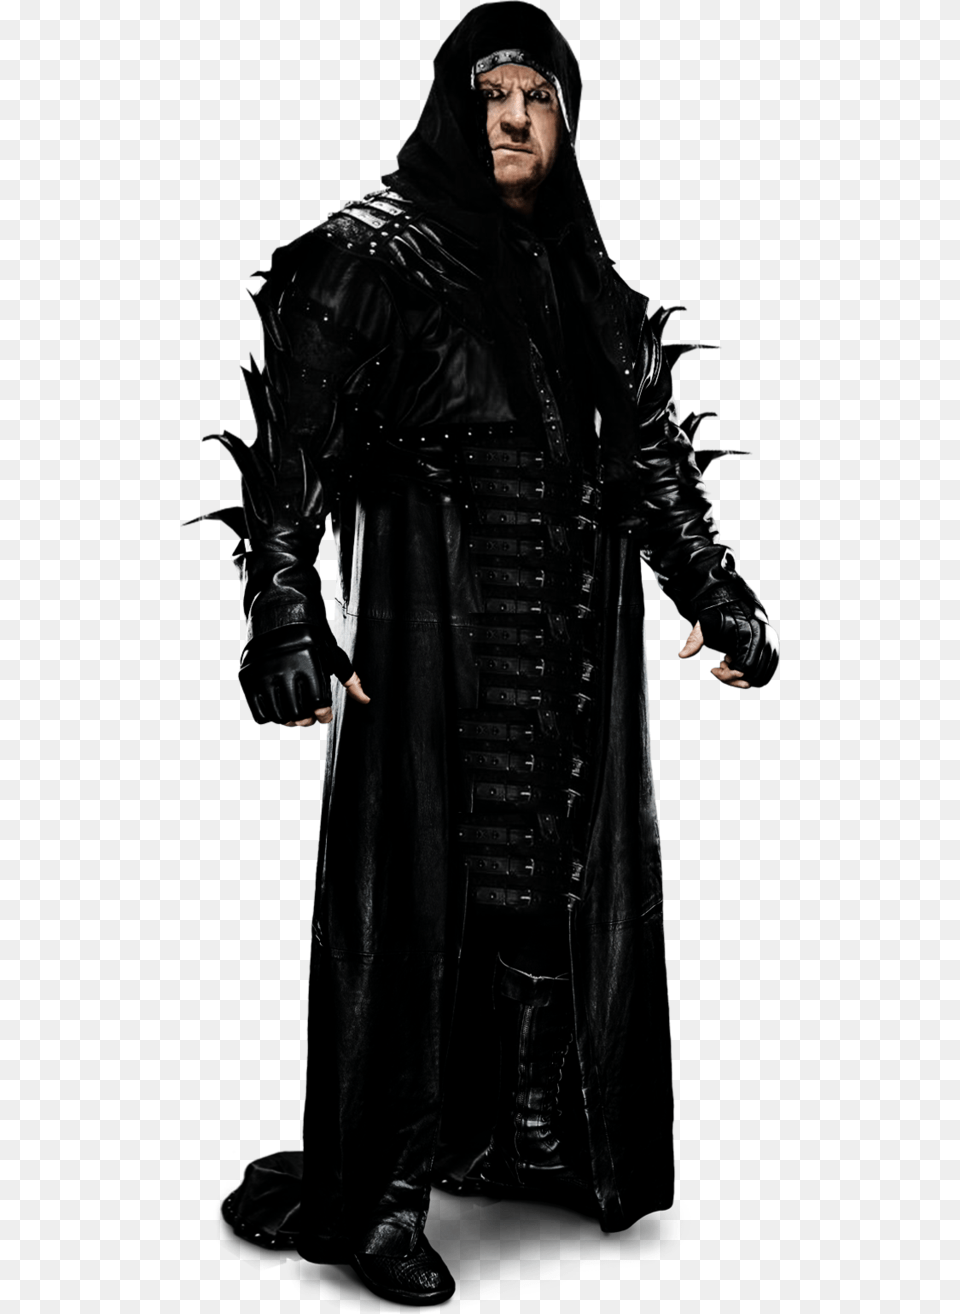 The Undertaker 2012 2013 Undertaker 2012, Jacket, Clothing, Coat, Person Png Image